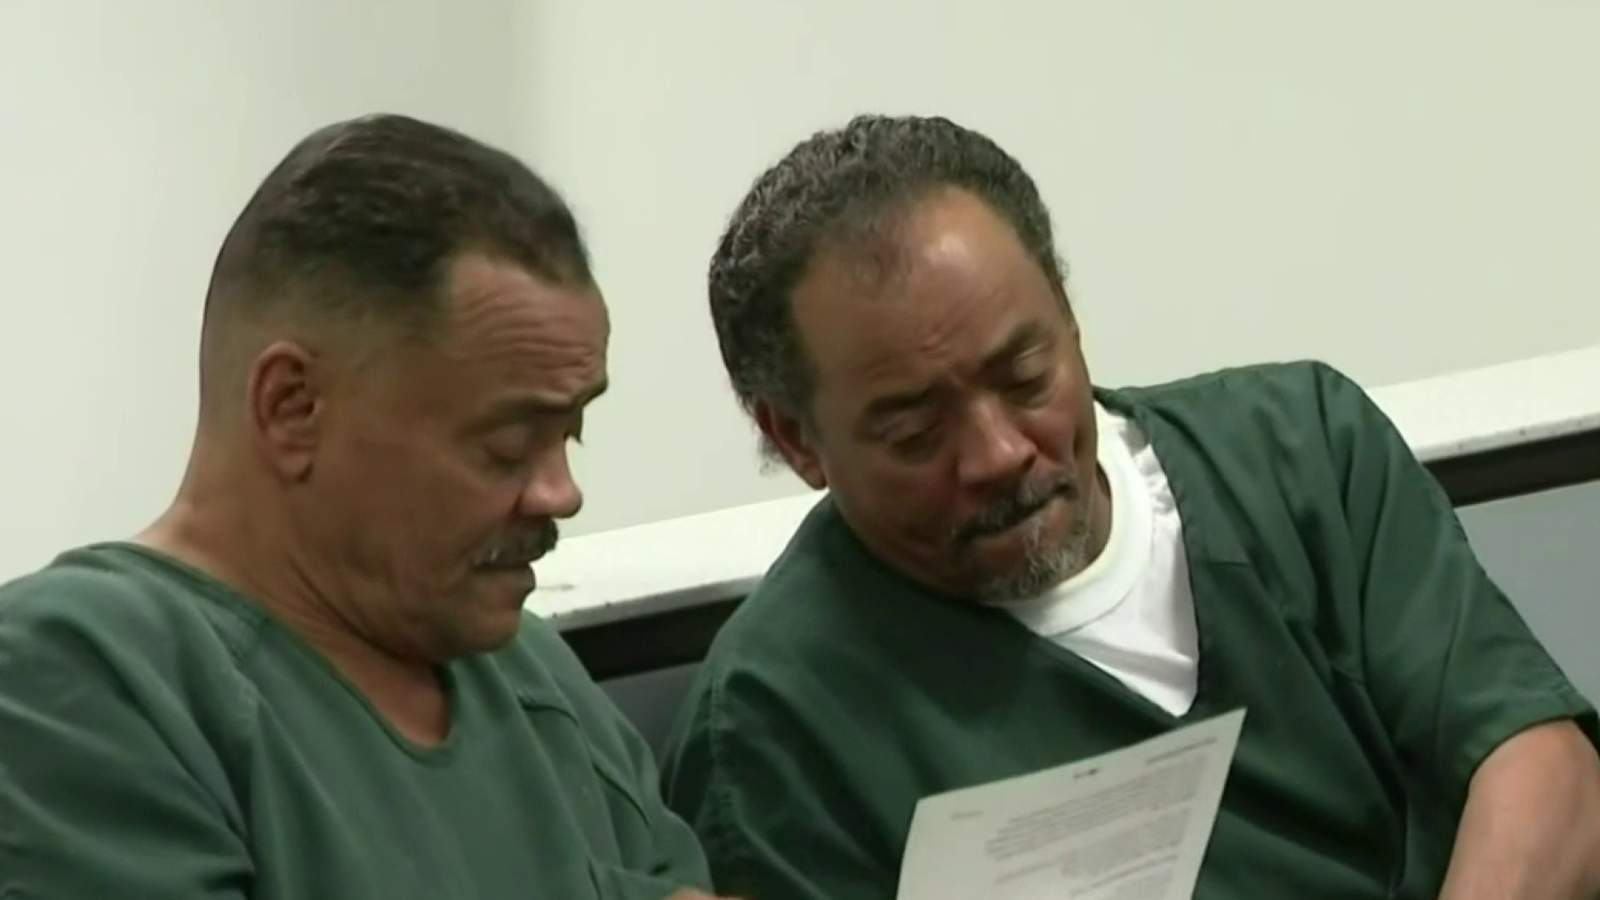 Men to be sentenced for shooting at Detroit Coney Island over fried mushrooms